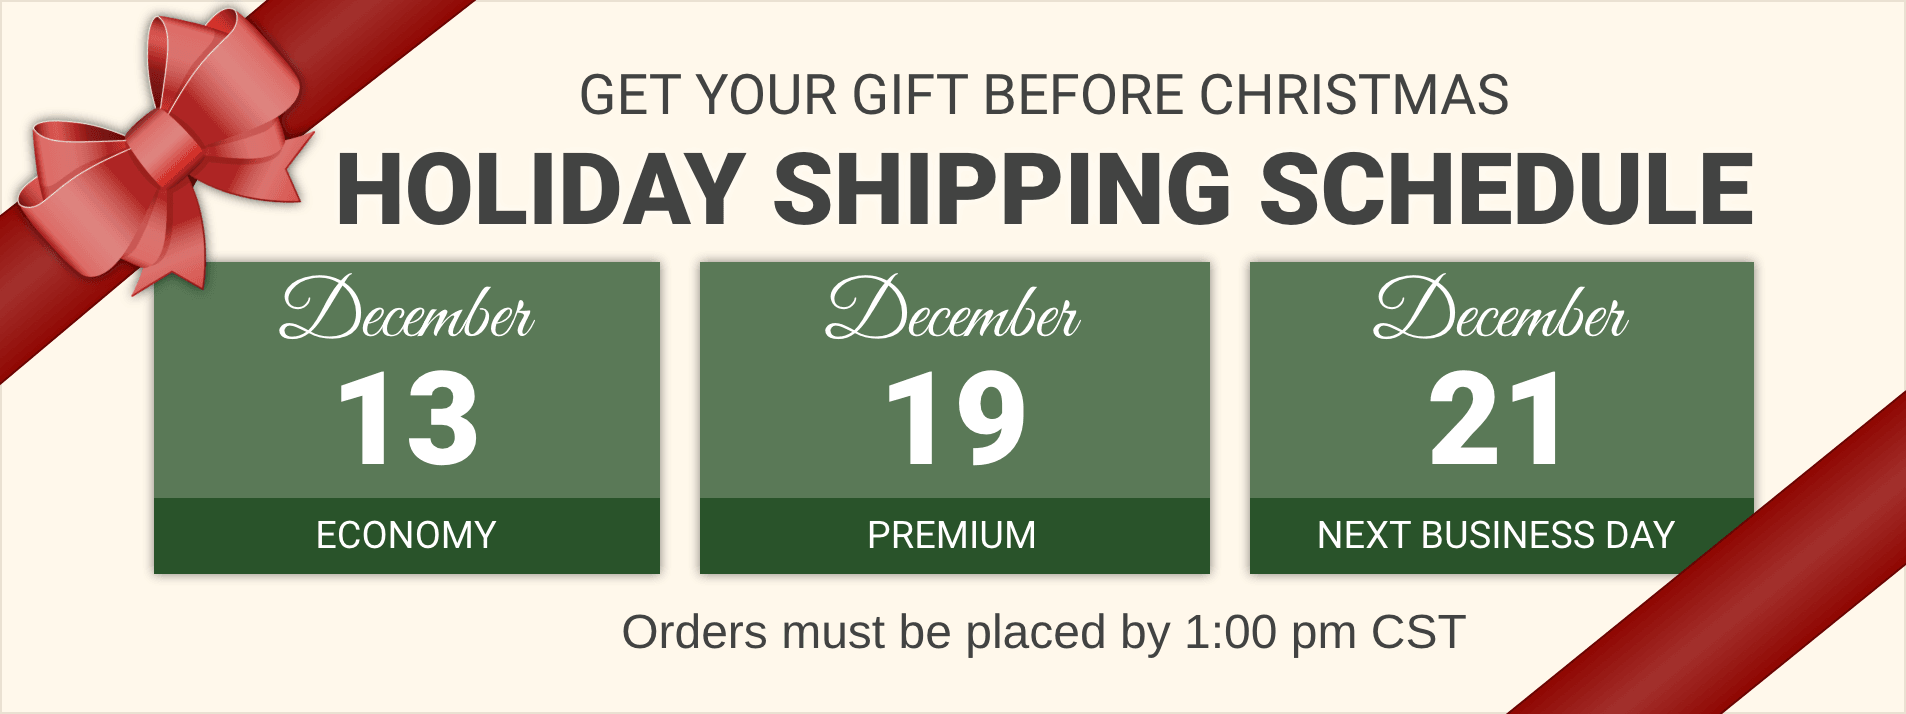 Holiday Shipping Schedule - Get your gifts before Christmas